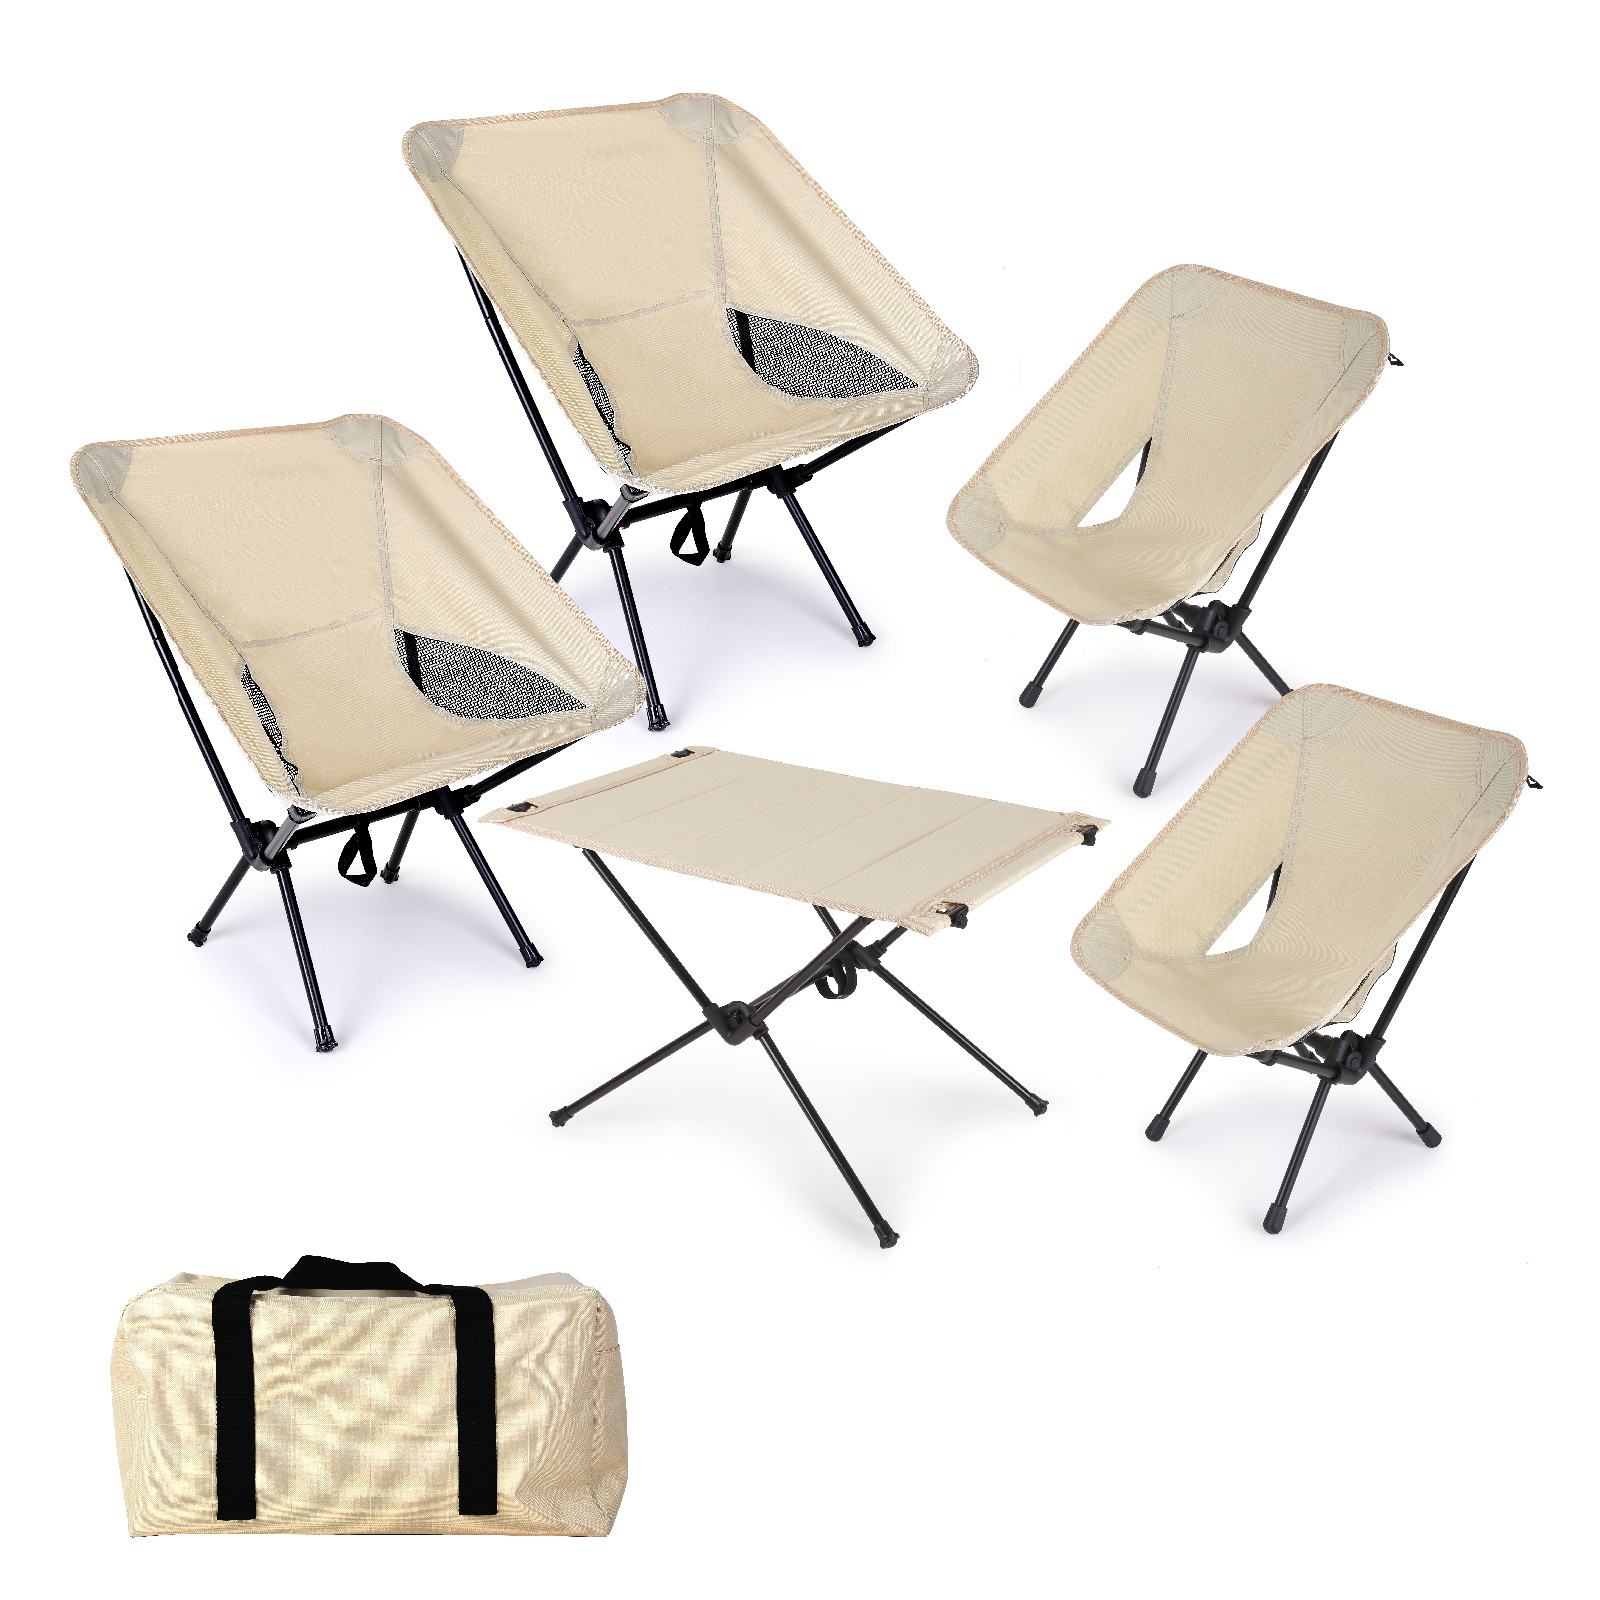 4 Folding Camping Chair & Side Table